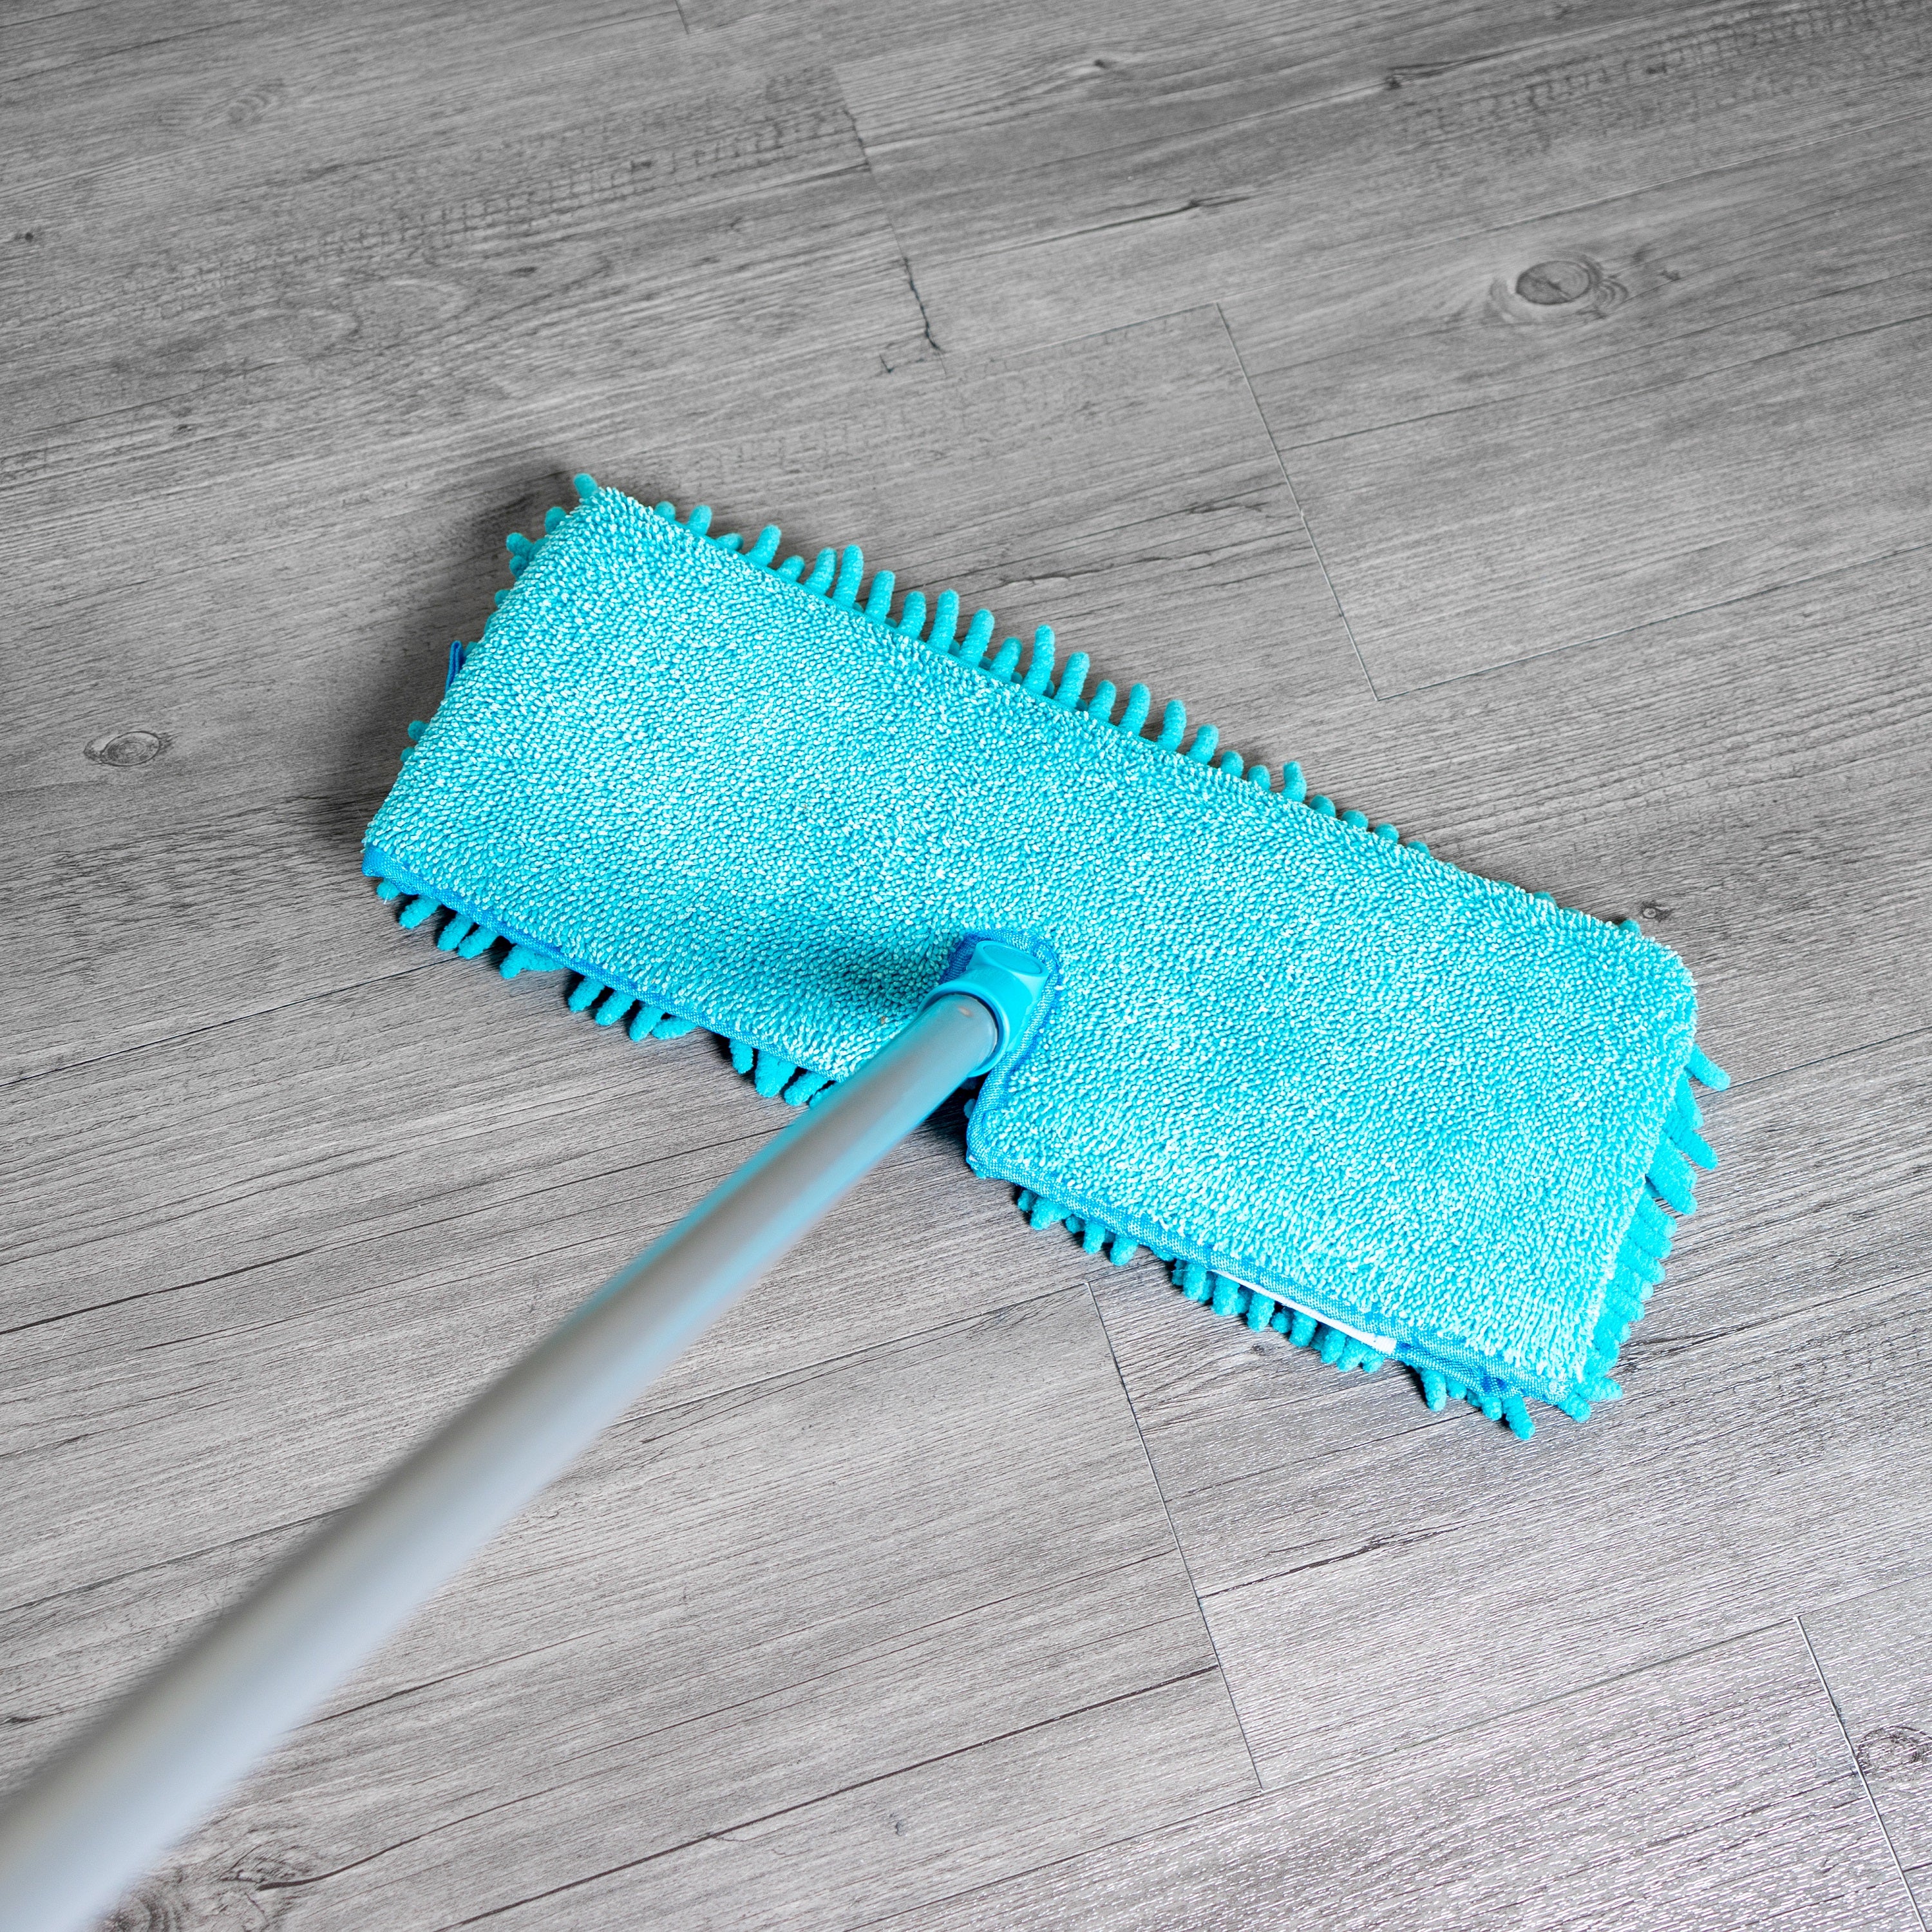 ALING Microfiber Mop For Wet And Dry Floor Cleaning, Reusable Flat